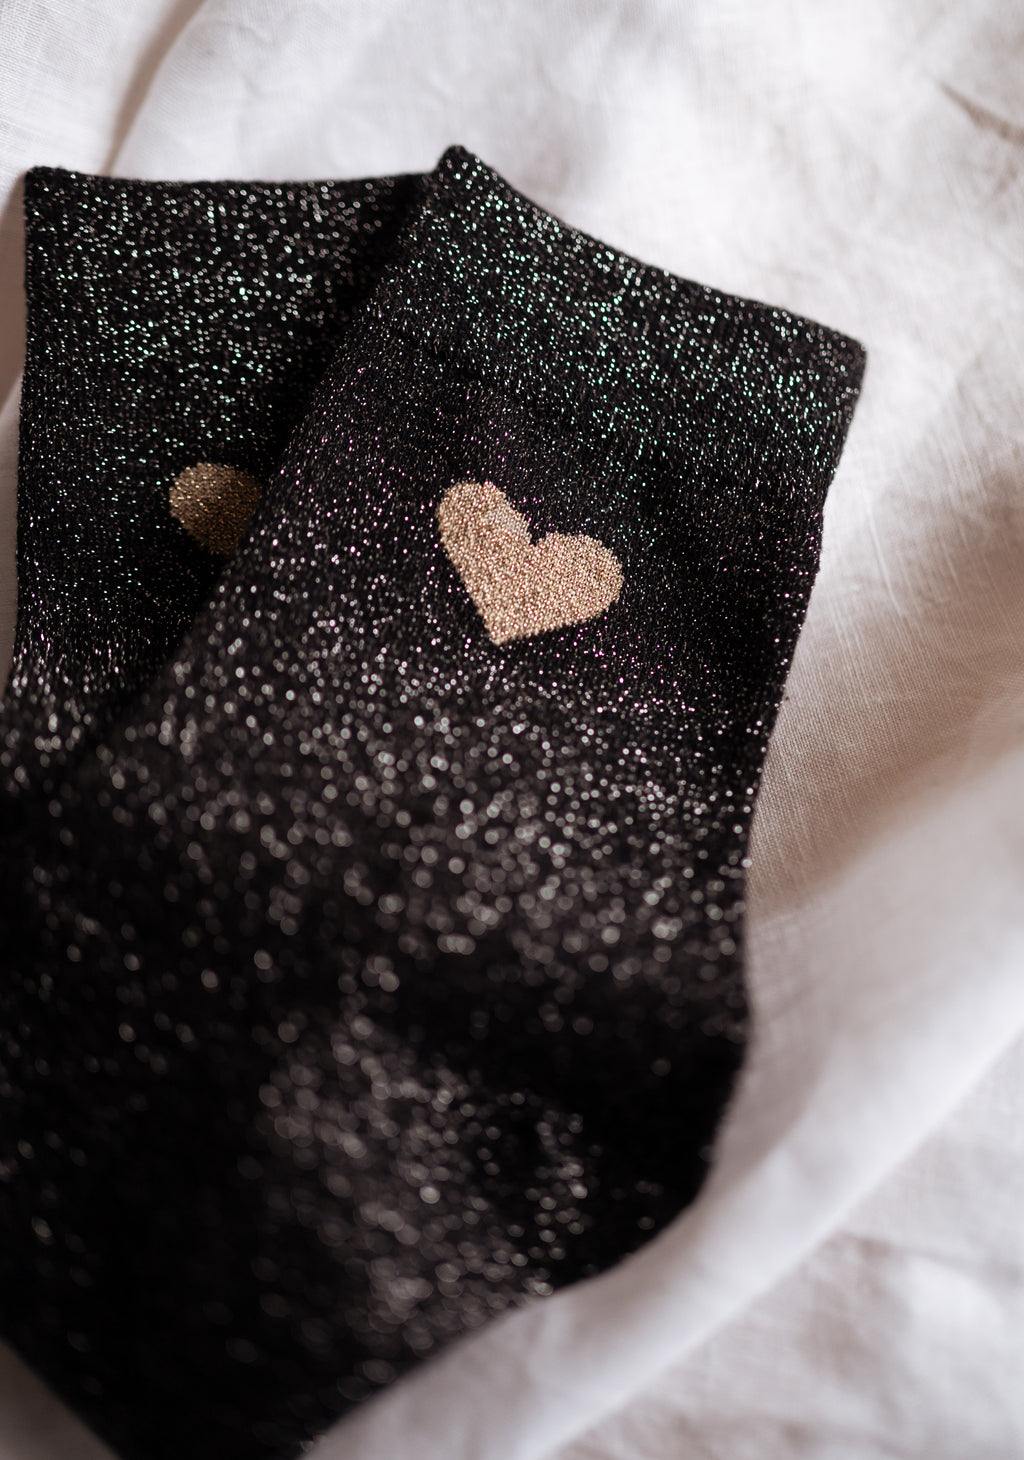 Heart Chausettes - black